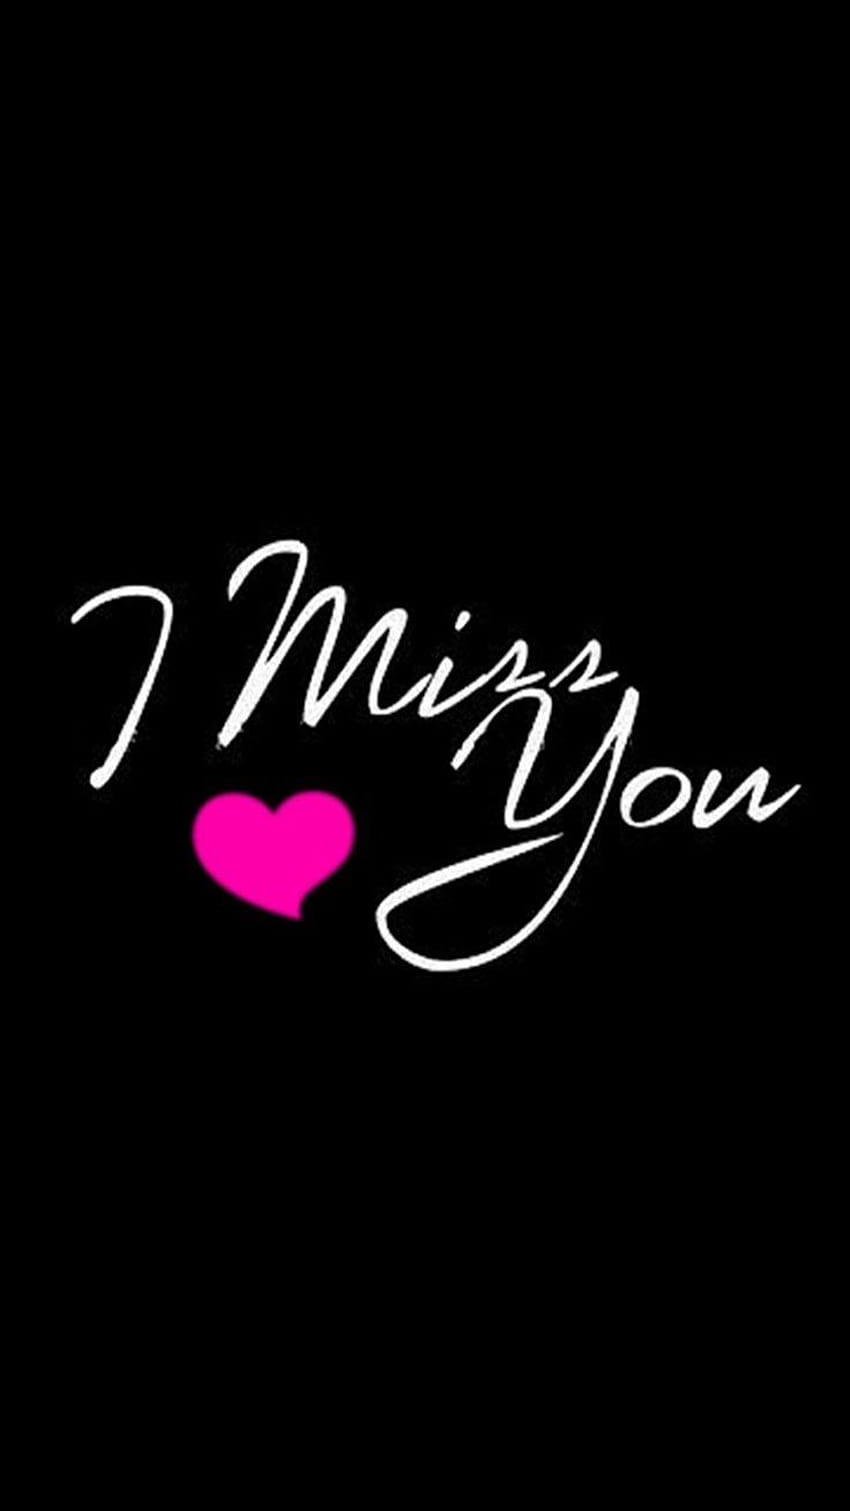 2,265 Miss You Thinking You Images, Stock Photos, 3D objects, & Vectors |  Shutterstock